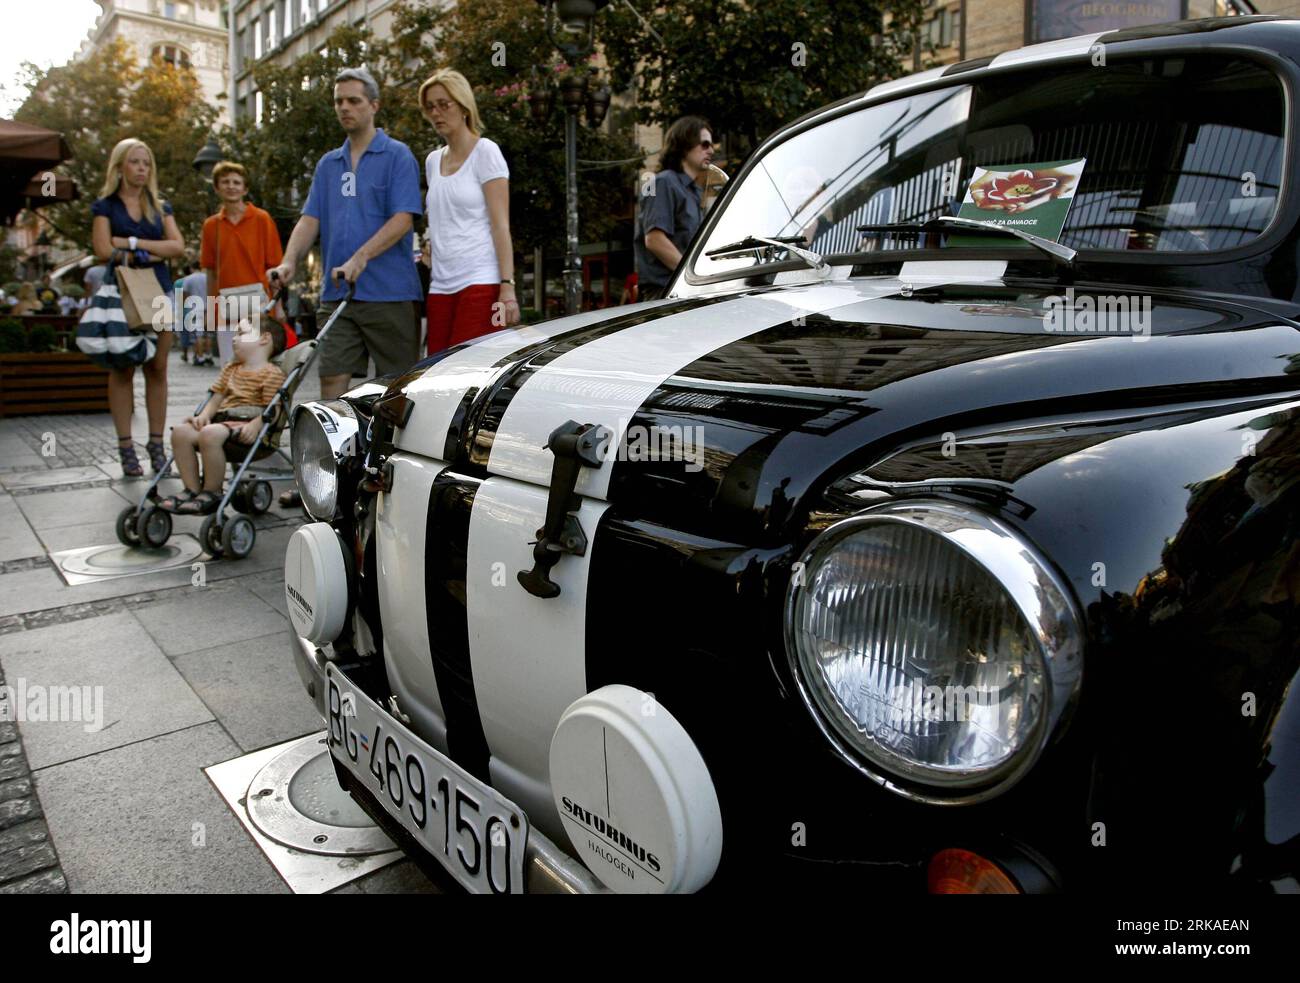 Bildnummer: 54329522  Datum: 22.08.2010  Copyright: imago/Xinhua (100823) -- BELGRADE, Aug. 23, 2010 (Xinhua) -- take look at then Yugoslav cars displayed at Central Square in Belgrade on Aug. 22, 2010. The Zastava 750 car made by the then Yugoslavian car producer Zavod Crvena Zastava was the then Yugoslavian version of Fiat 600 under license from 1955 to 1985. The cars are still widely available in Serbia, Montenegro, and Bosnia and Herzegovina. (Xinhua)(Serbia Out) SERBIA-BELGRADE-OLD CARS-DISPLAY PUBLICATIONxNOTxINxCHN Wirtschaft Gesellschaft Oldtimer Auto Ausstellung kbdig xub 2010 quer  o Stock Photo